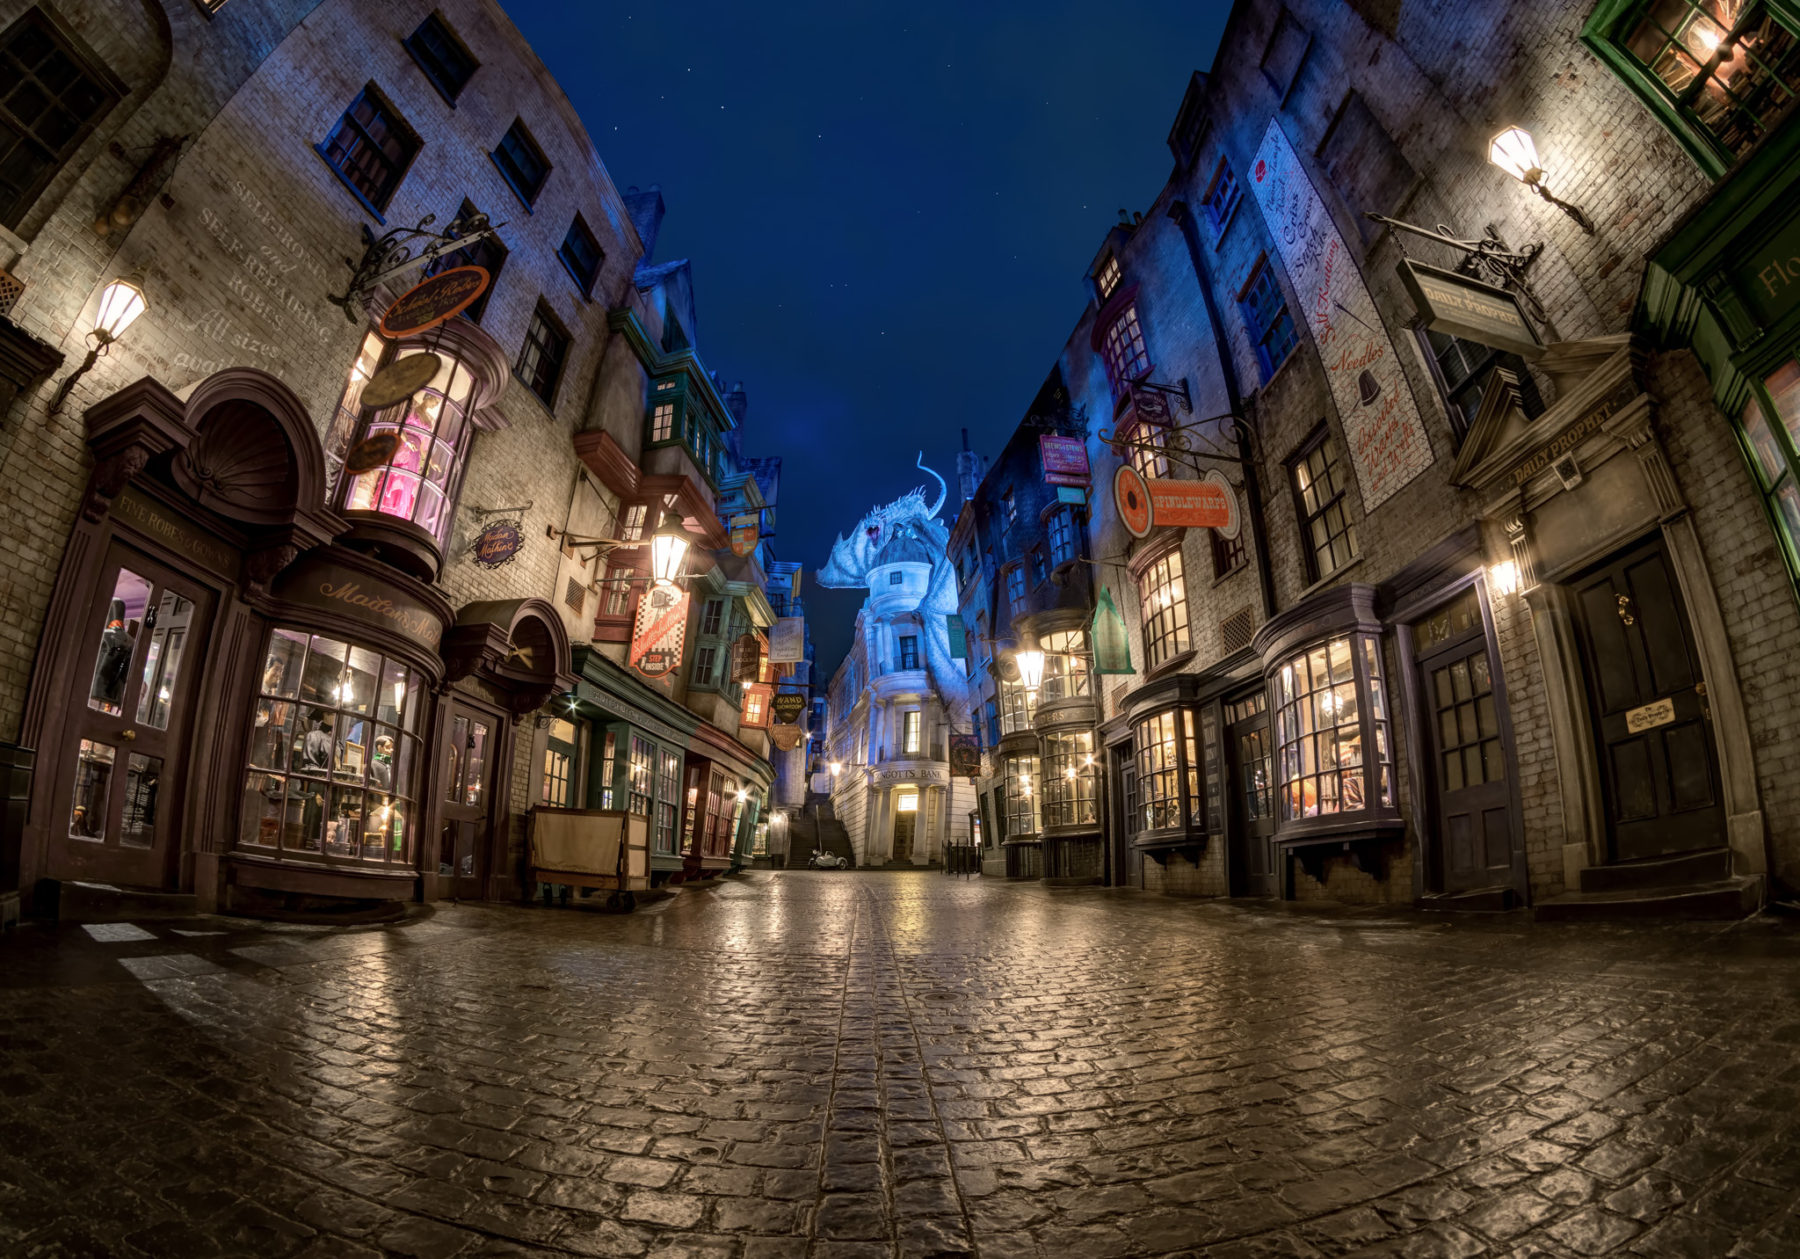 Unforgettable Moments at The Wizarding World of Harry Potter